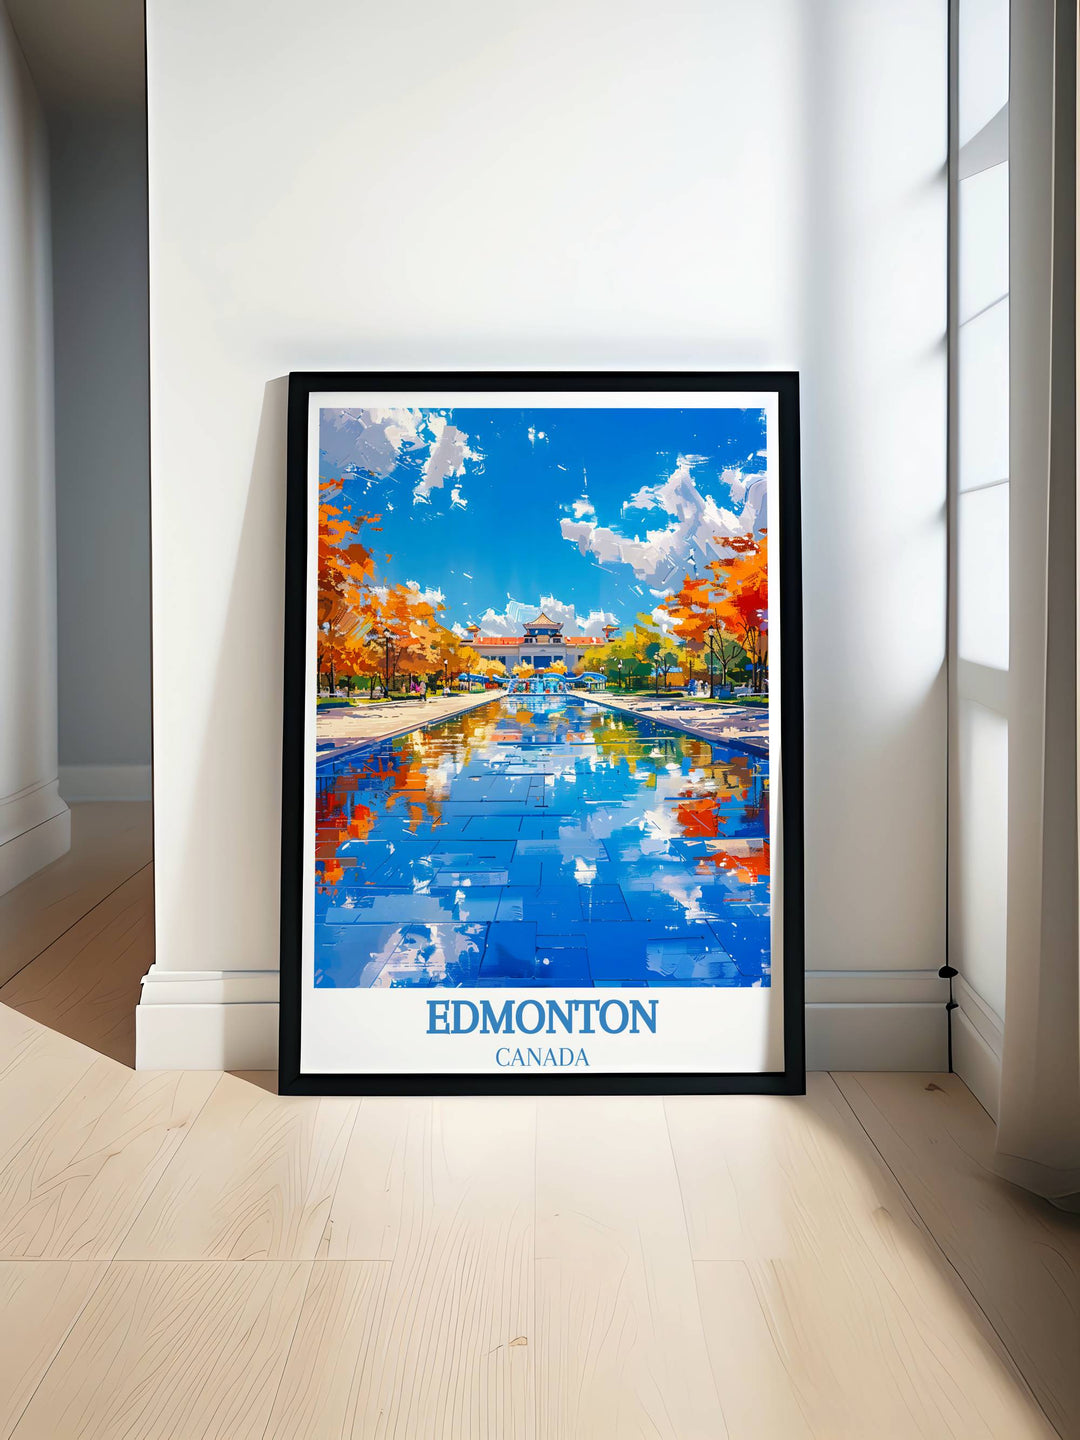 Classic Edmonton Poster with a vintage travel design from MapYourDreams, ideal for adding a nostalgic touch to your collection of travel memorabilia.